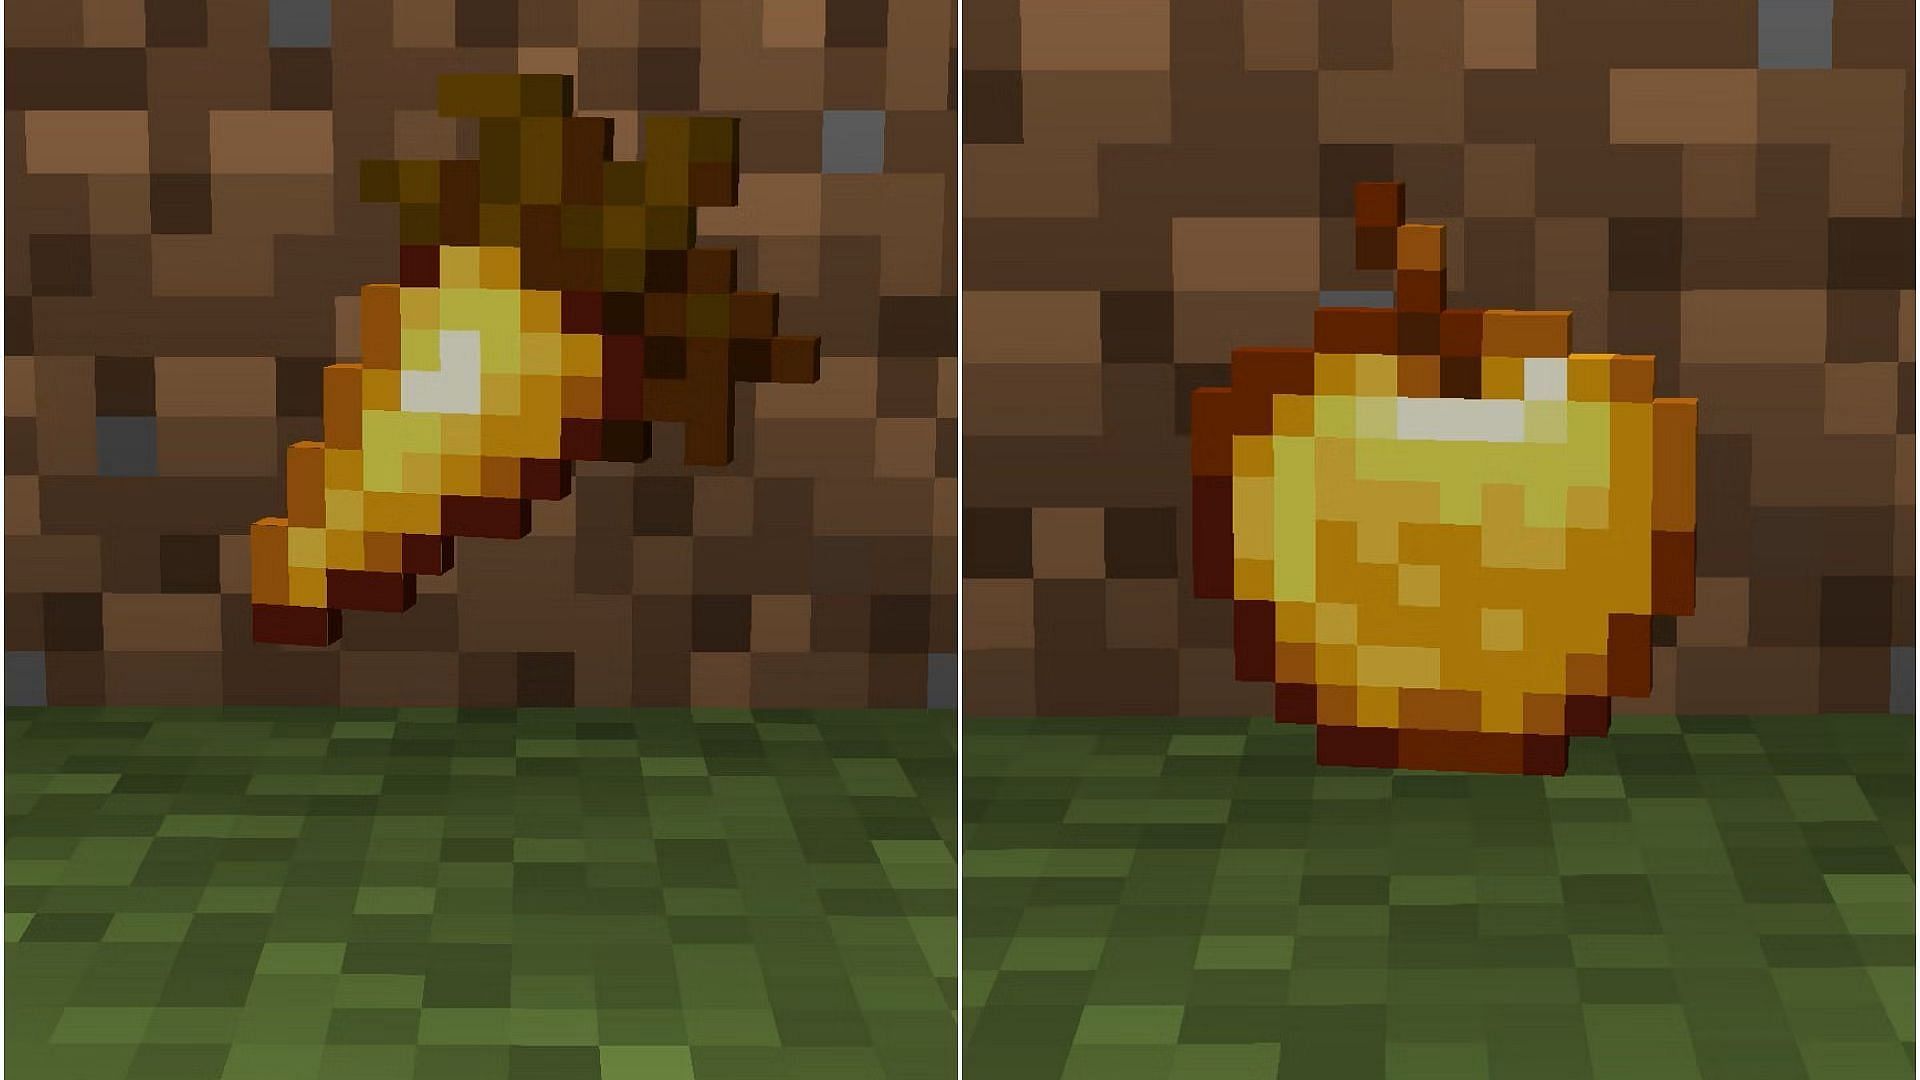 Gold can be used to craft powerful food items with special abilities in Minecraft (Image via Sportskeeda)